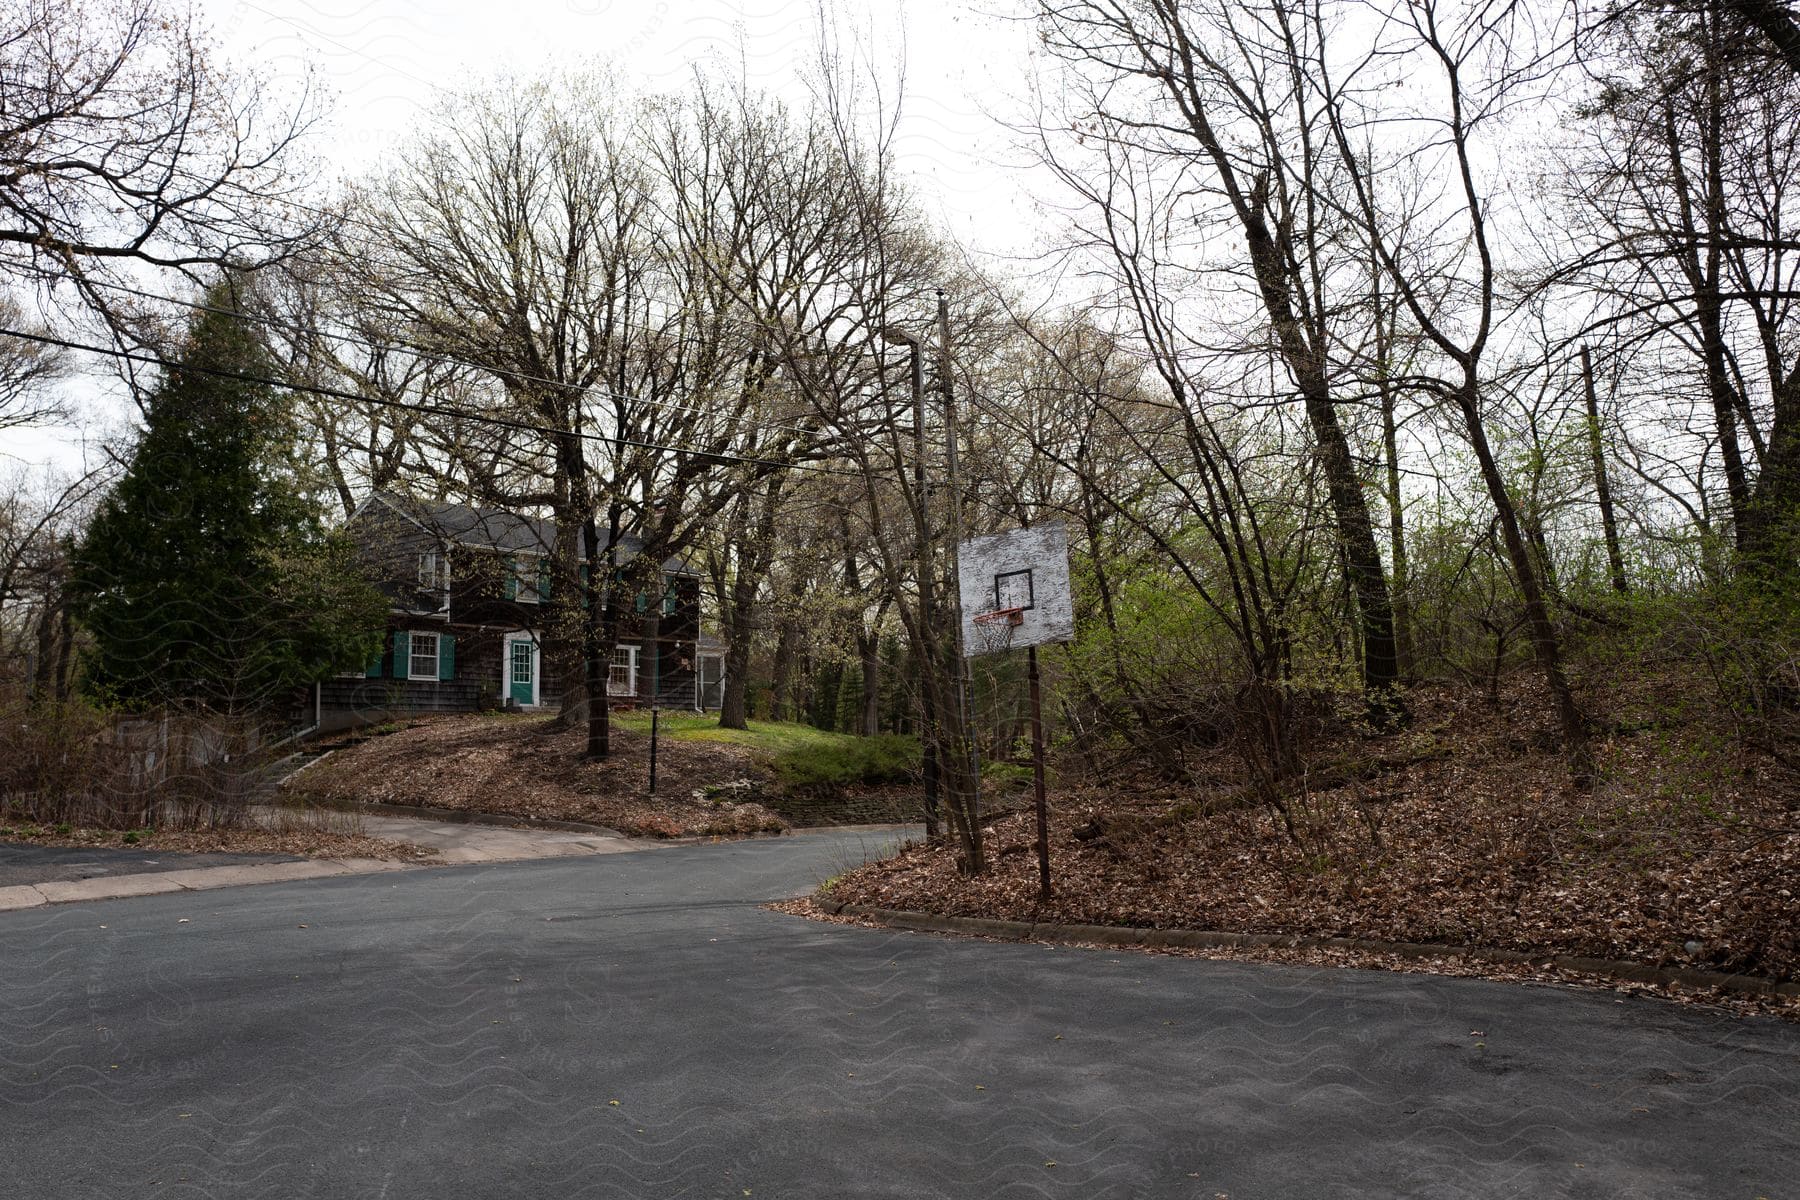 A basketball hoop stands near a road in a neighborhood with a house across the street